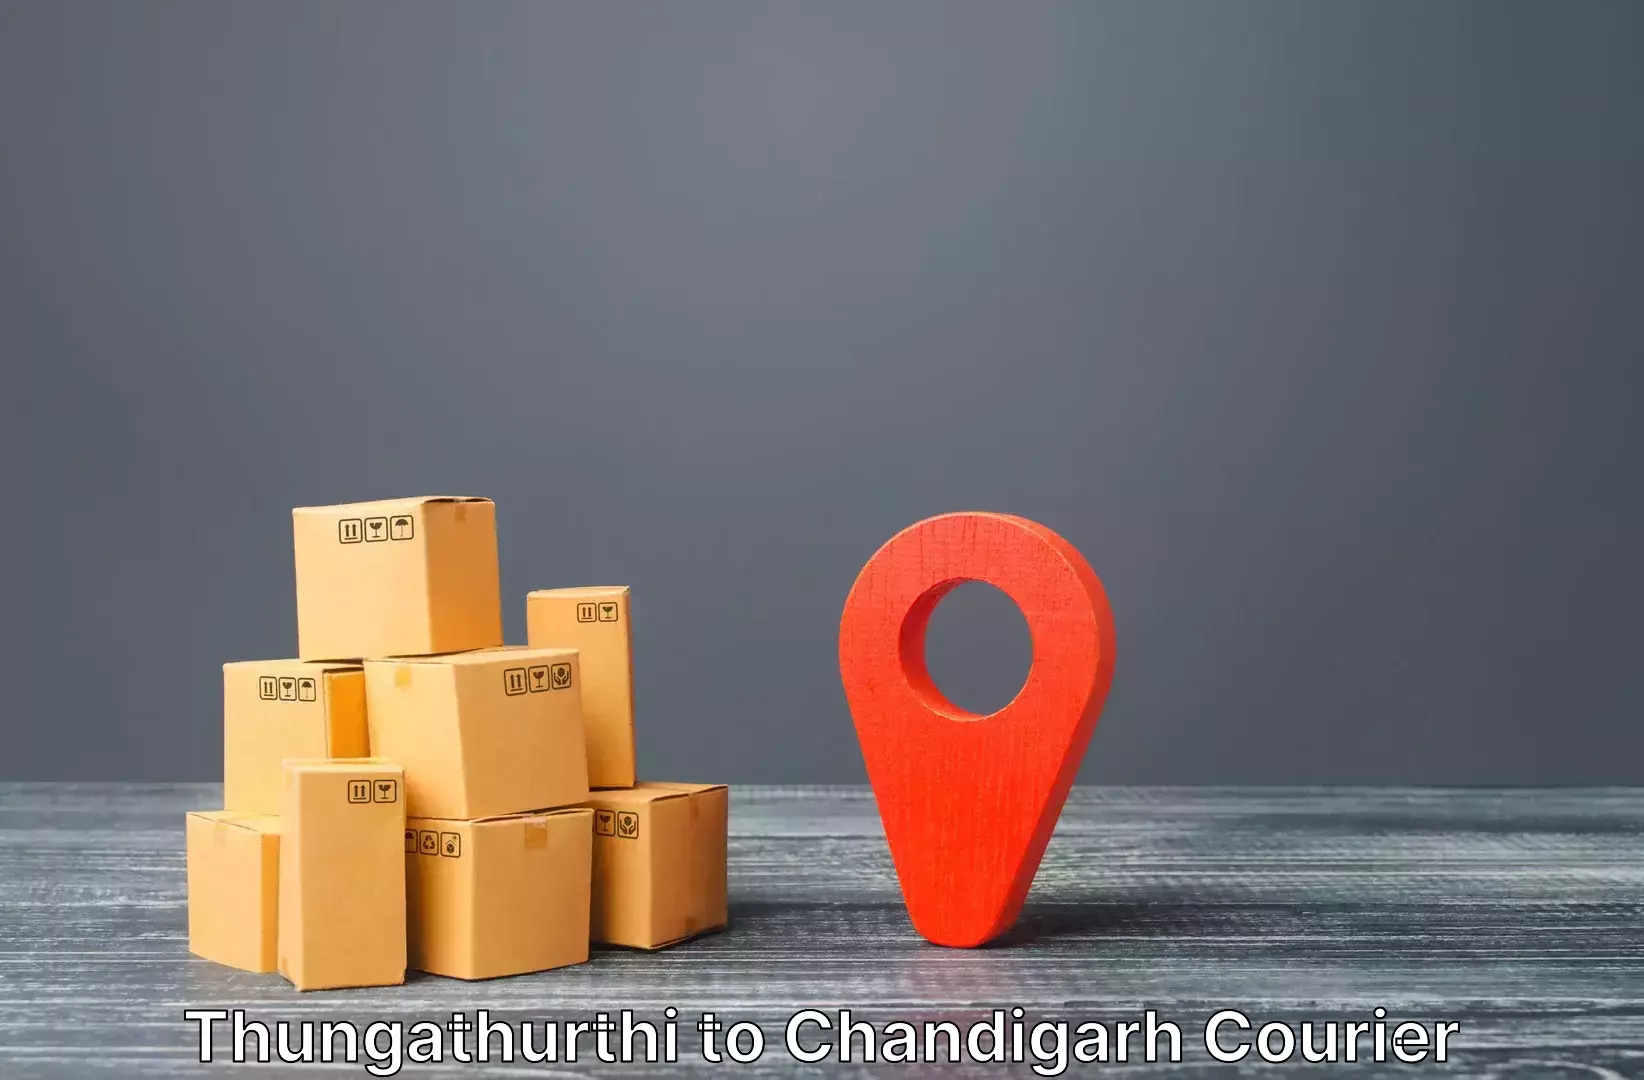 Luggage delivery network Thungathurthi to Chandigarh